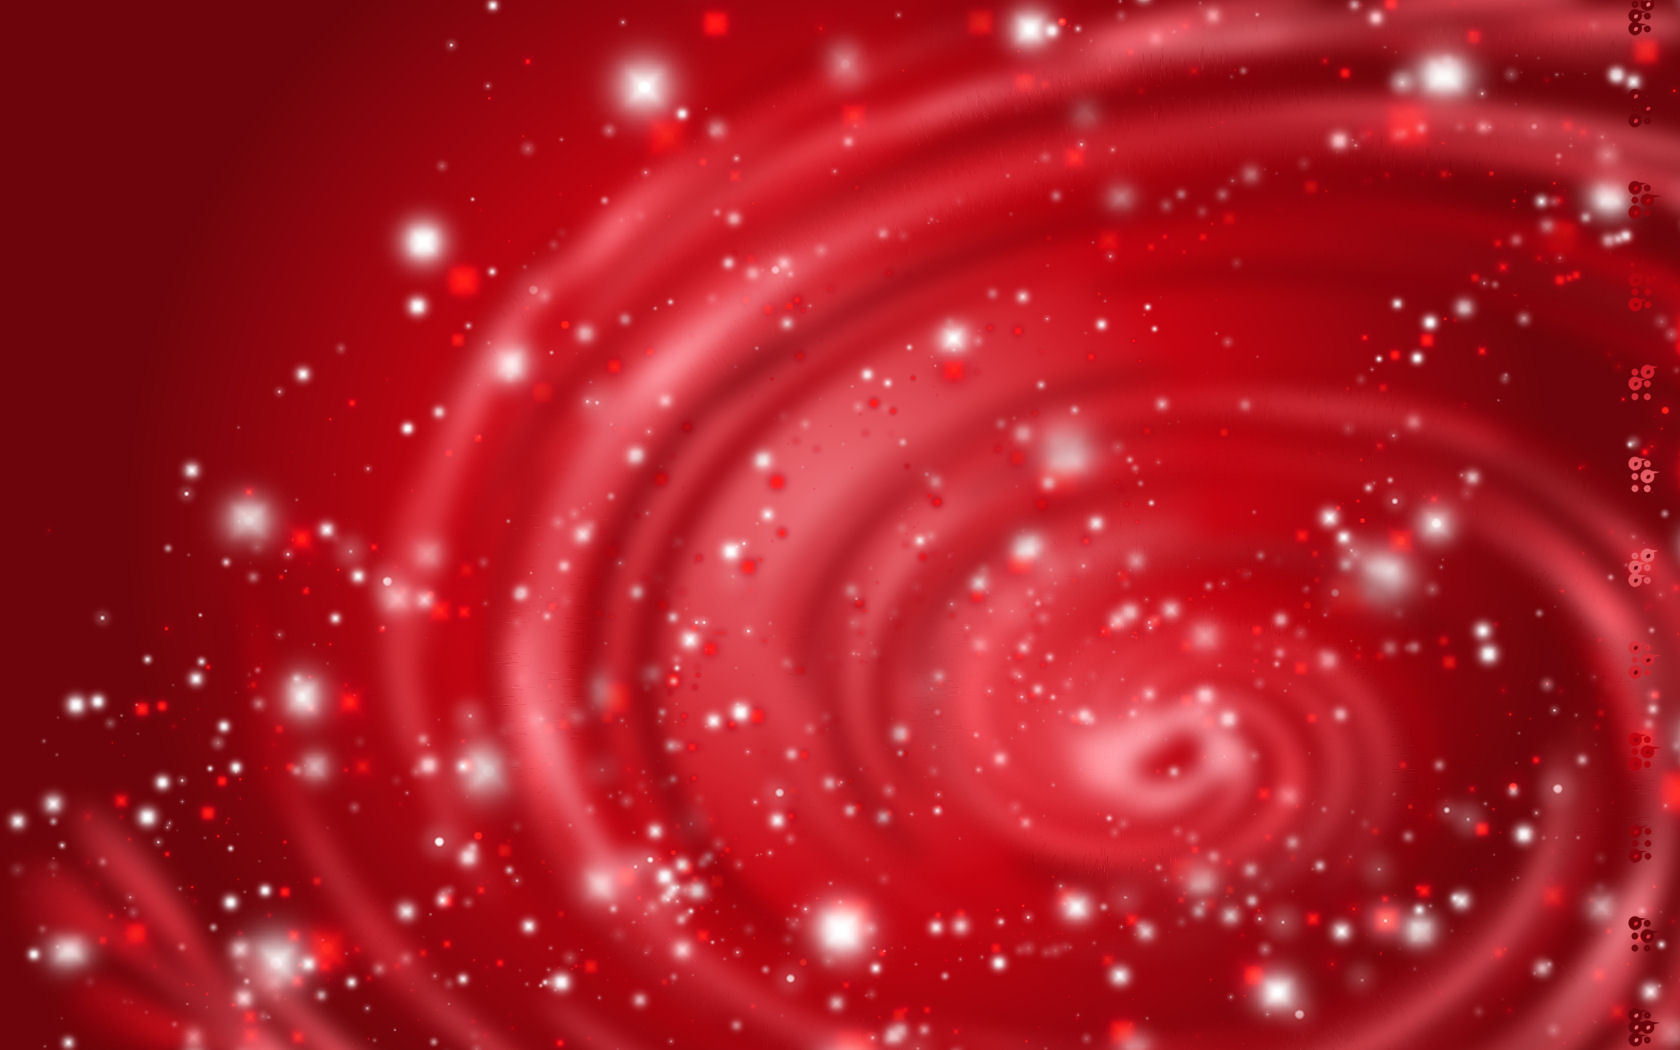 Red swirl with stars powerpoint background